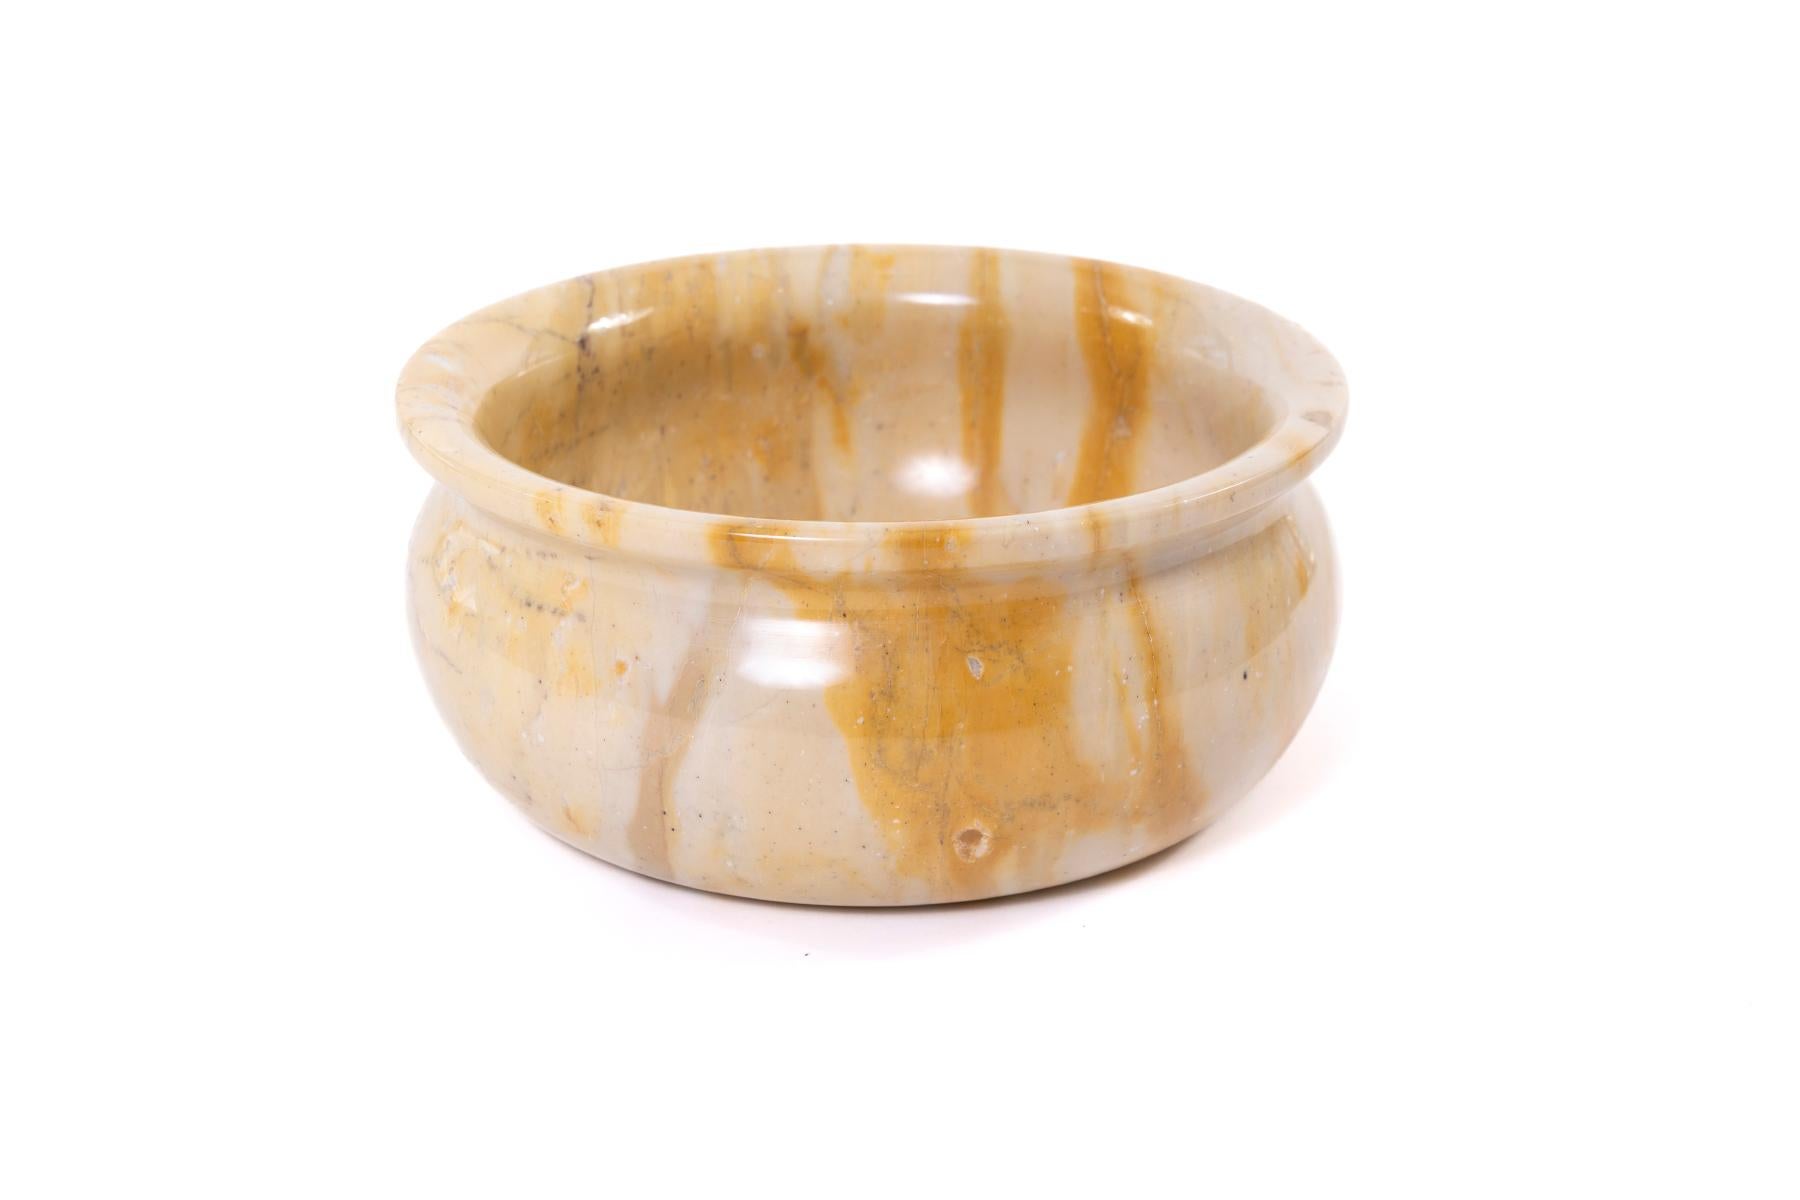 Sleek set of decorative bowls in solid marble by artist John Bartolomeo. A larger yellow bowl measuring 11